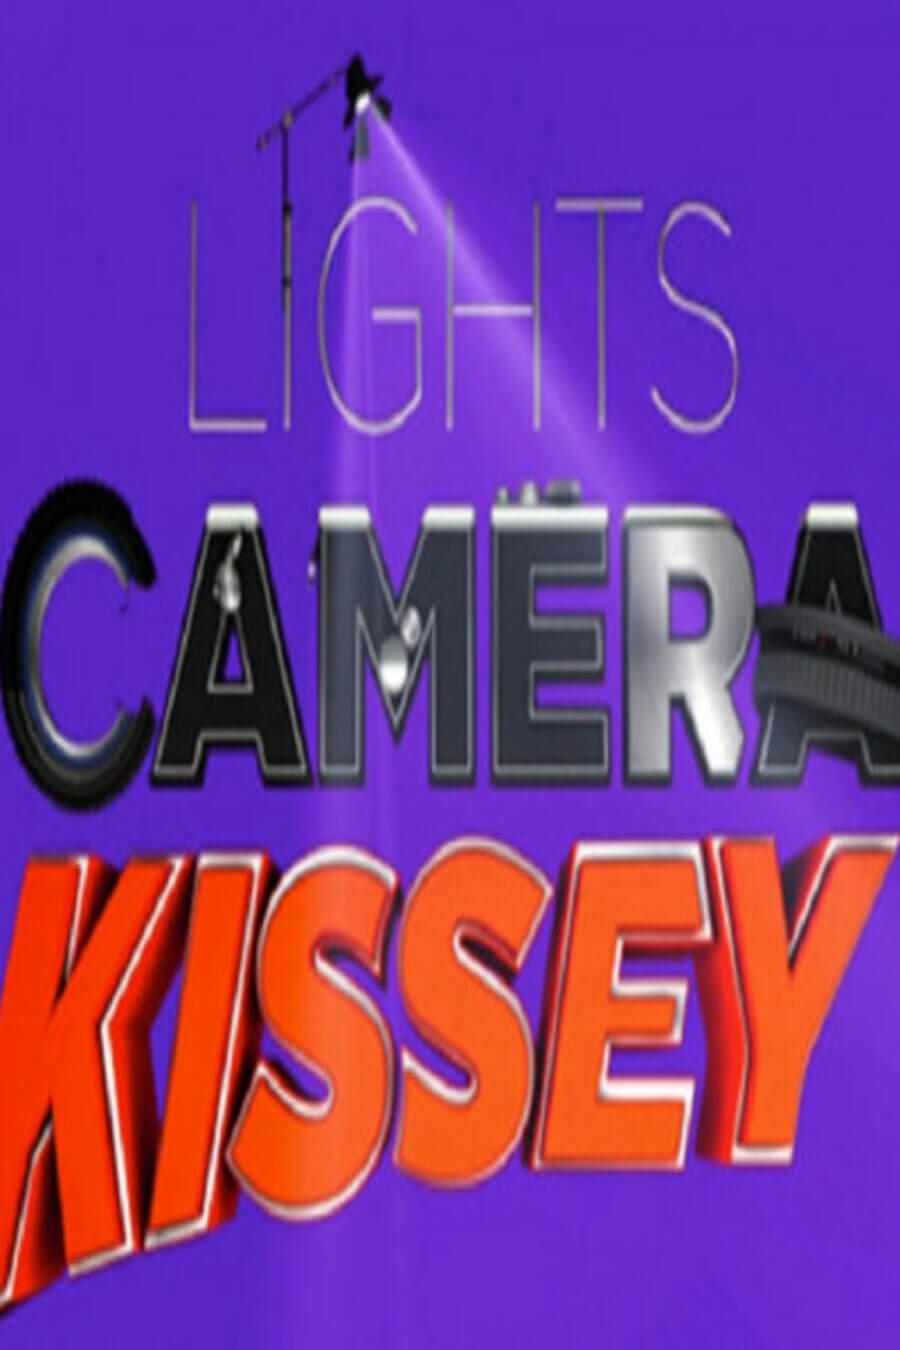 TV ratings for Lights Camera Kissey in South Africa. SonyLIV TV series